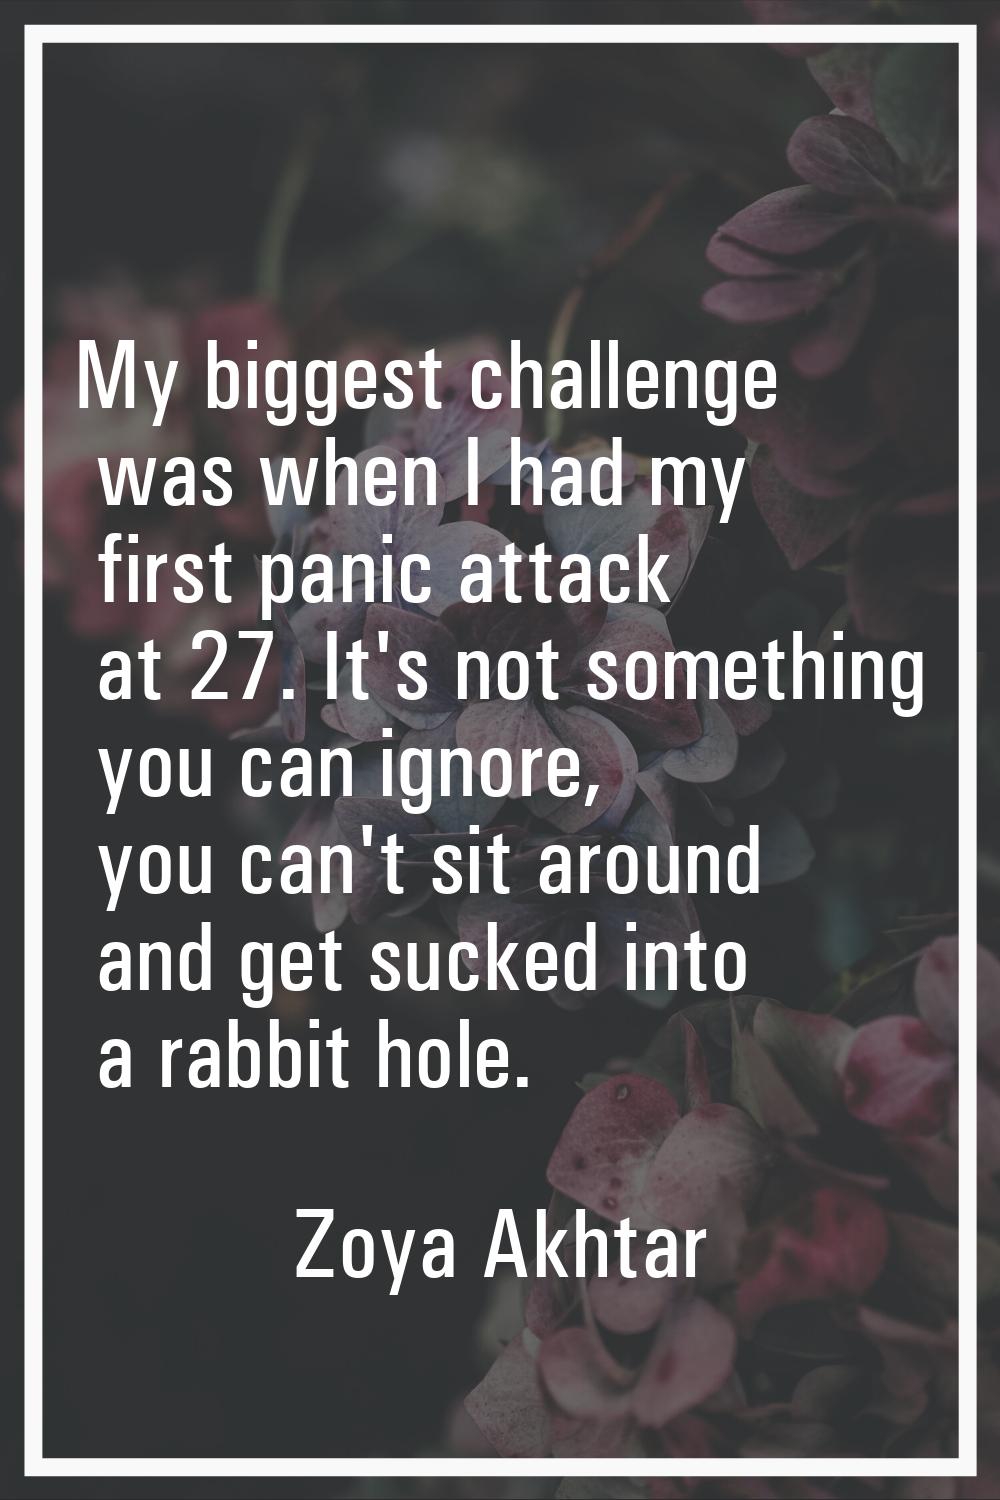 My biggest challenge was when I had my first panic attack at 27. It's not something you can ignore,